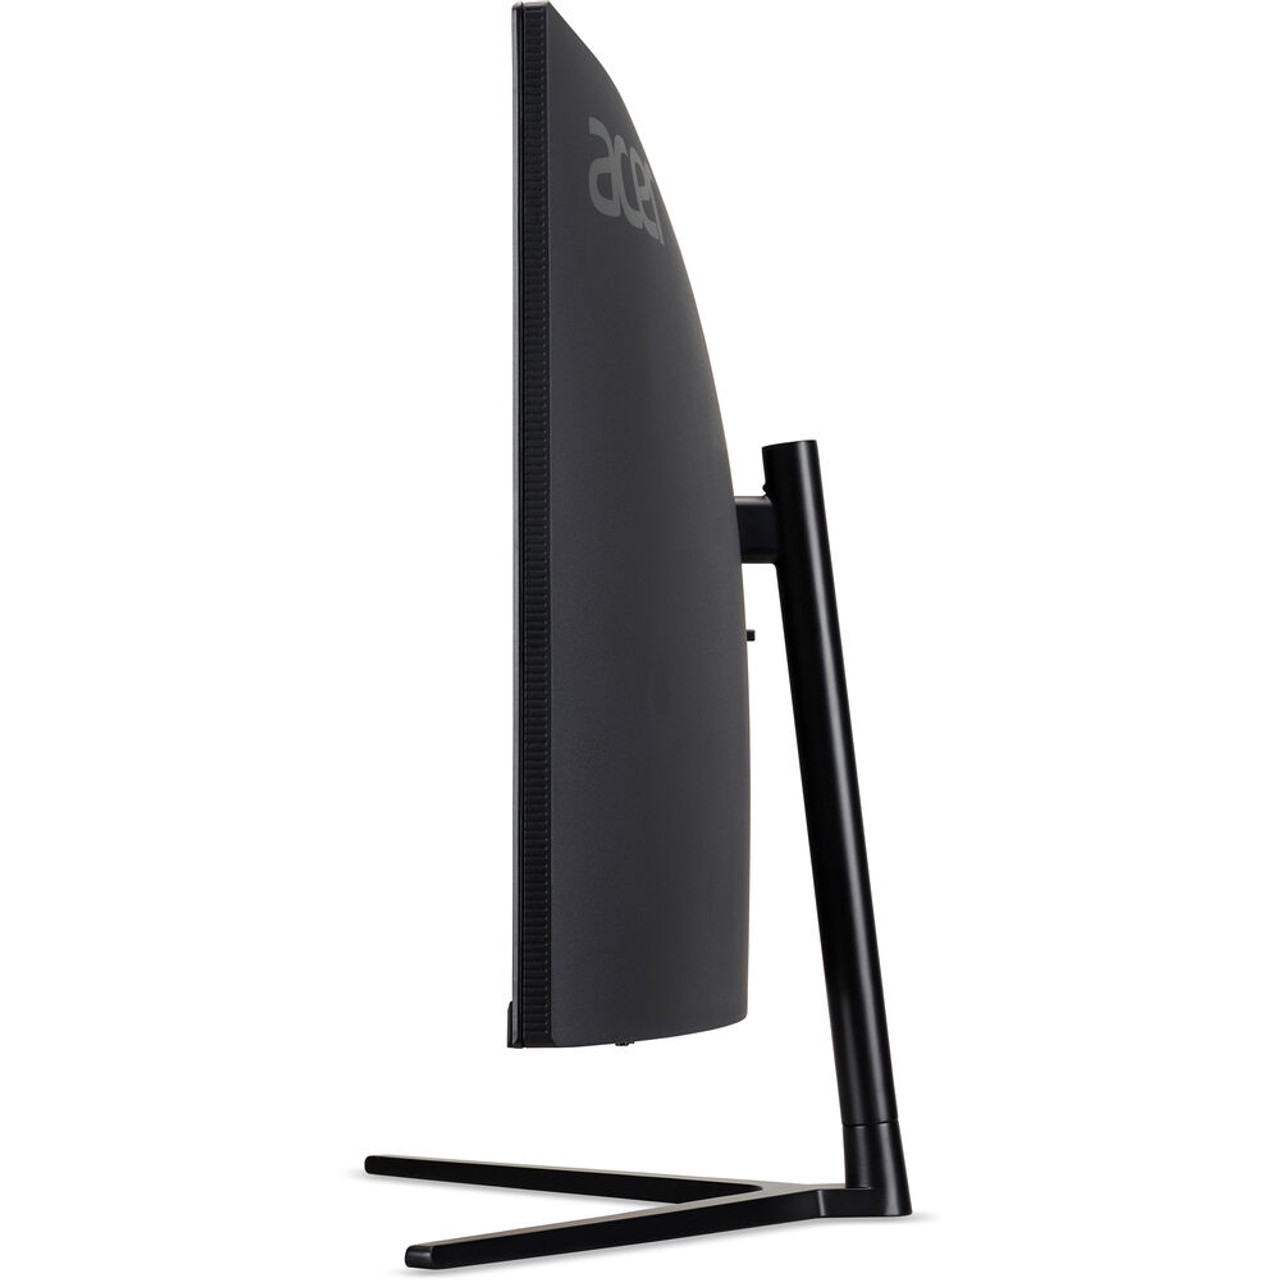 Acer 31.5” Class WQHD Curved Gaming Monitor